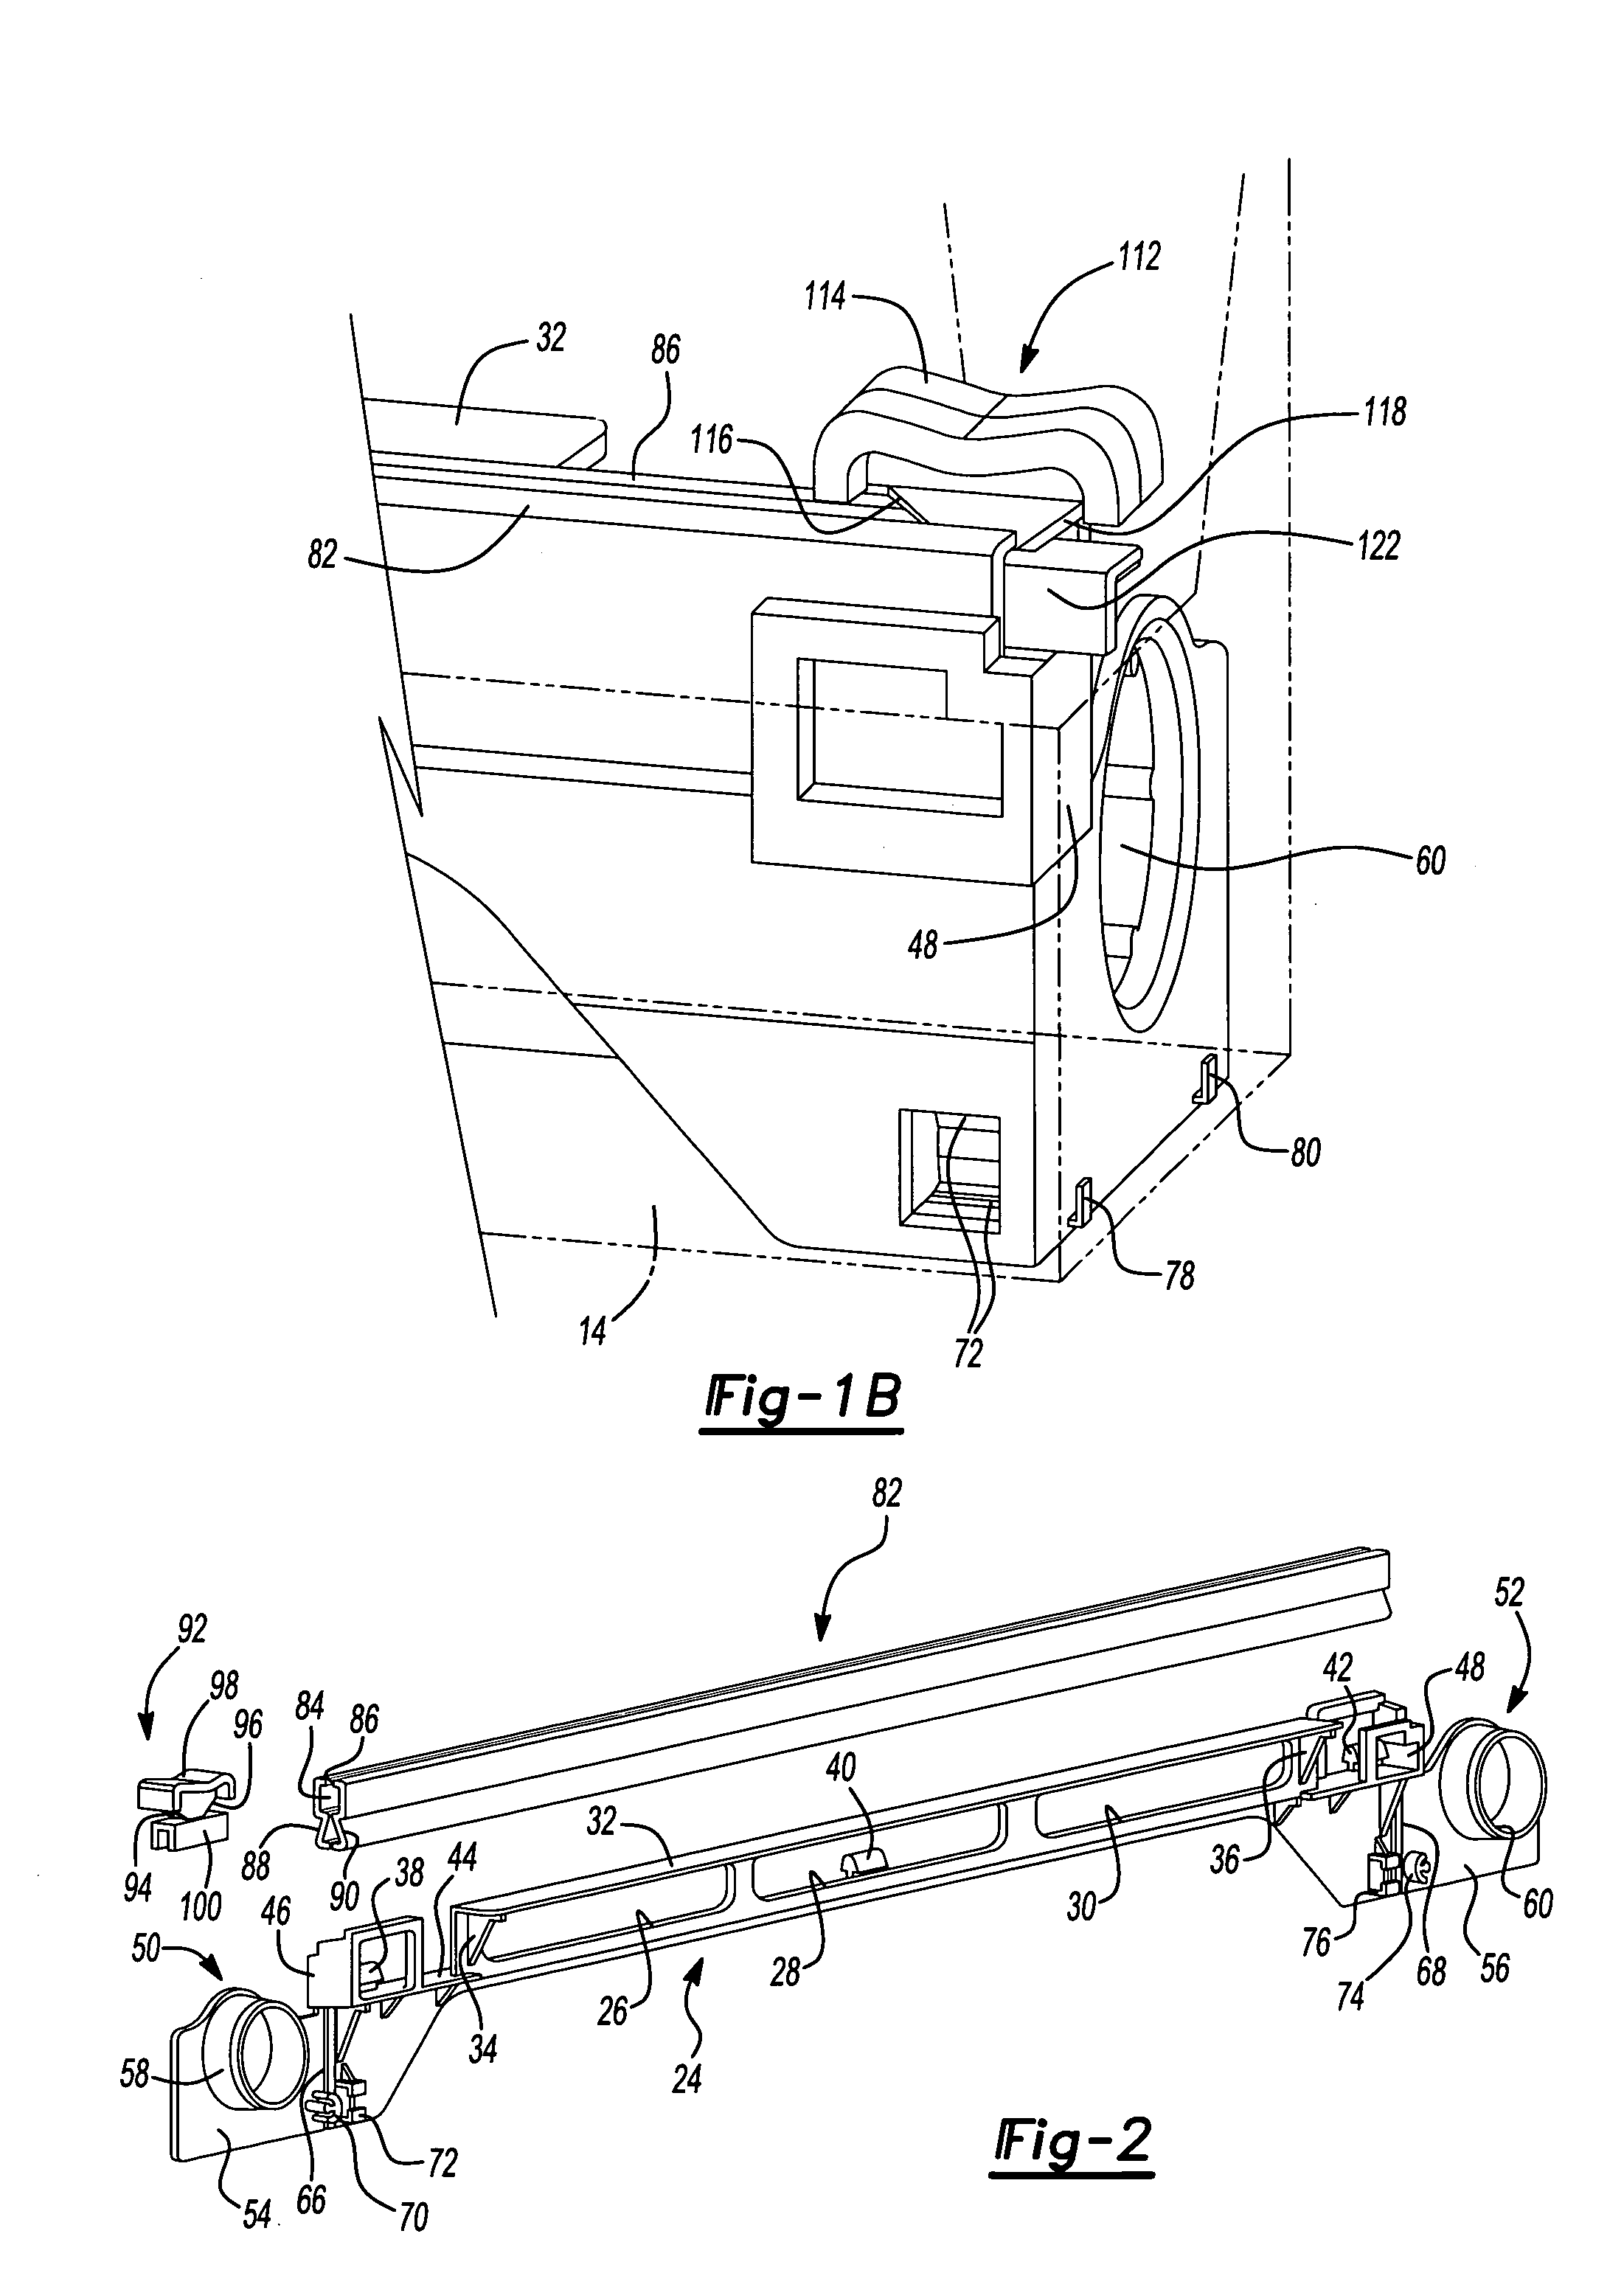 Roll supporting slide cutter assembly incorporating a traversable cutter tab and in particular capable of being supported within a carton enclosure associated with a wrap material roll